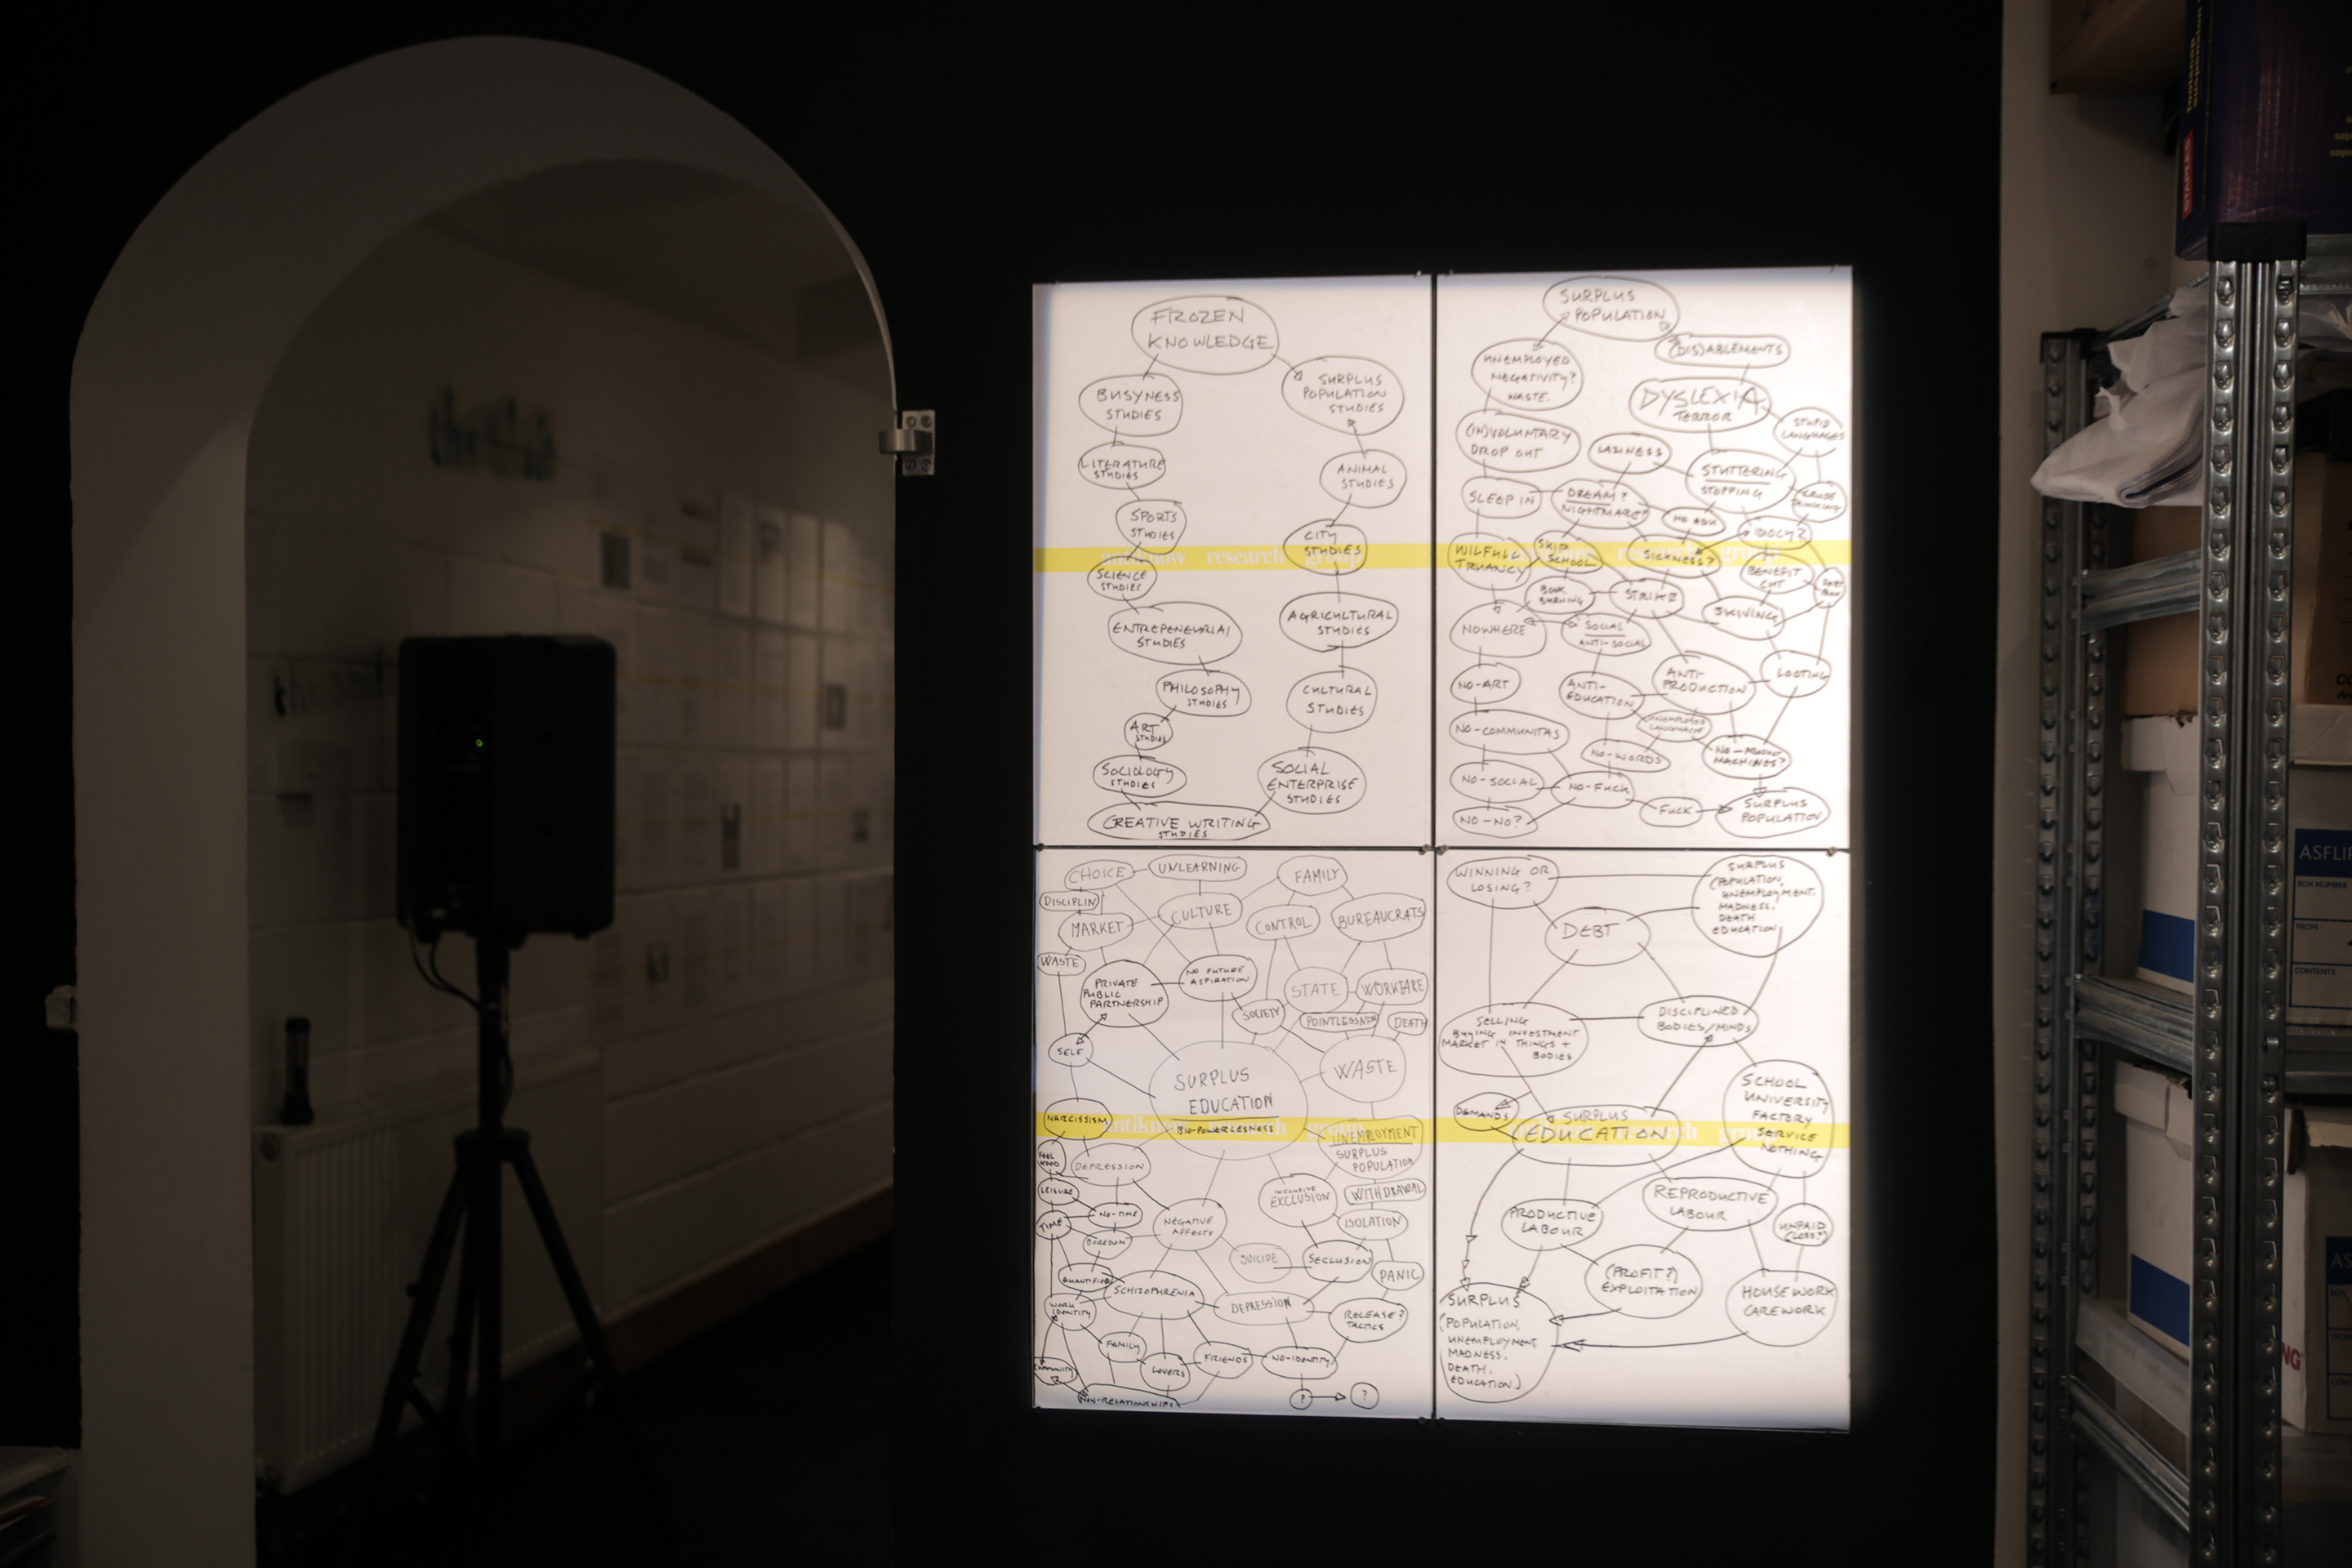 ANTIKNOW SCENE 1 The Brain. Diagrams of surplus education [A collection of diagrams on the wall] From ANTIKNOW Directed by Jakob Jakobsen 29 November 2013–12 January 2014 (FTHo Talks #1 | The Mind The Hand 0)